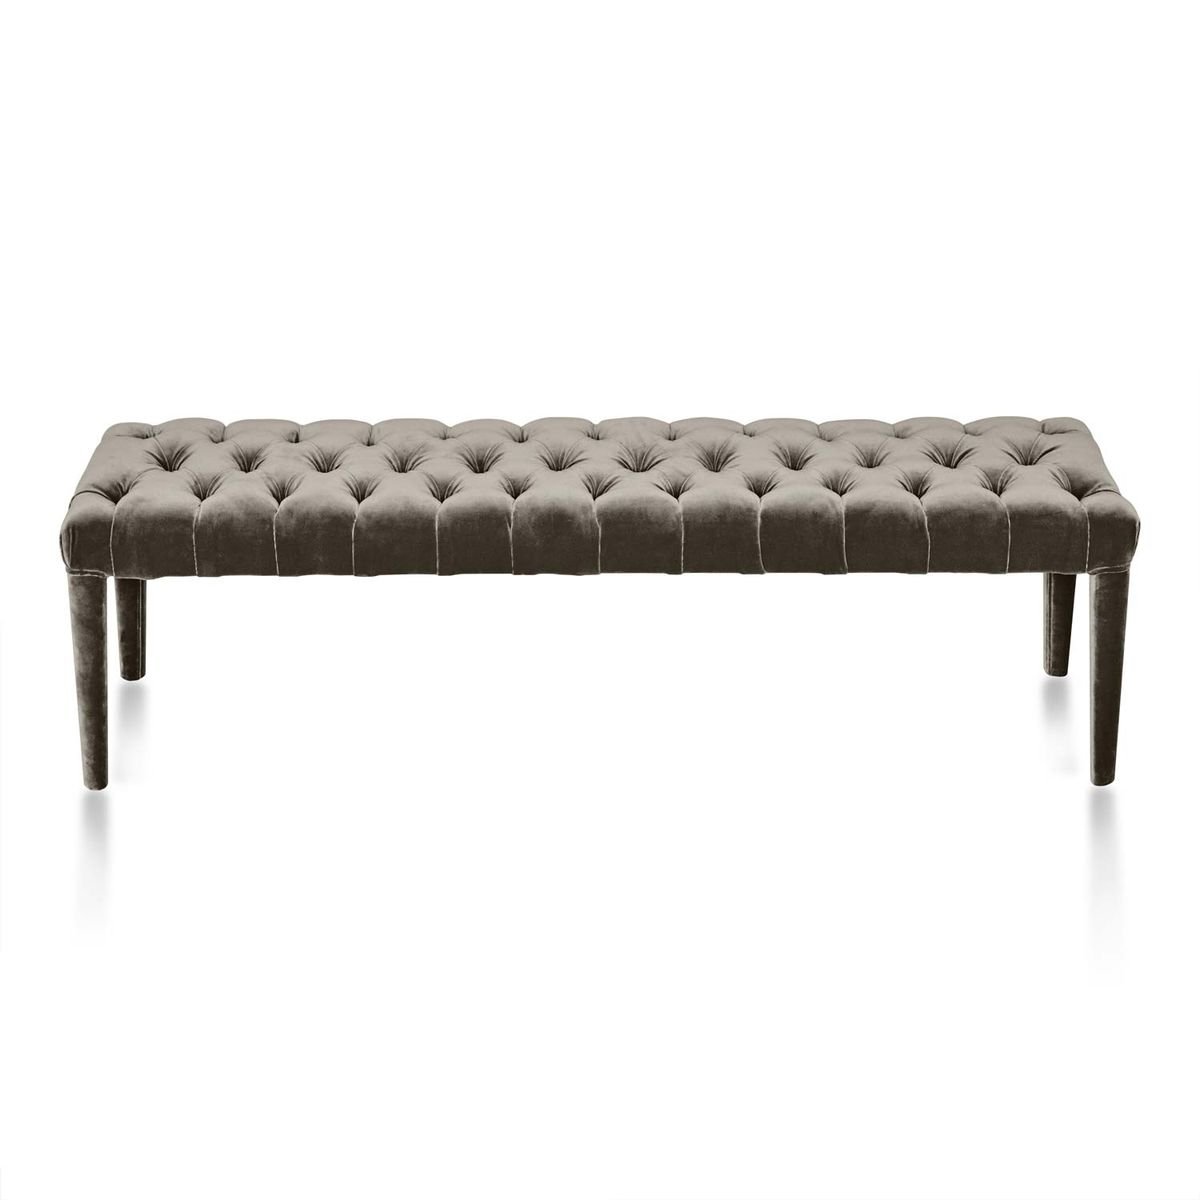 Farfalla Ecological Ottoman Bench From D3co For Sale At Pamono